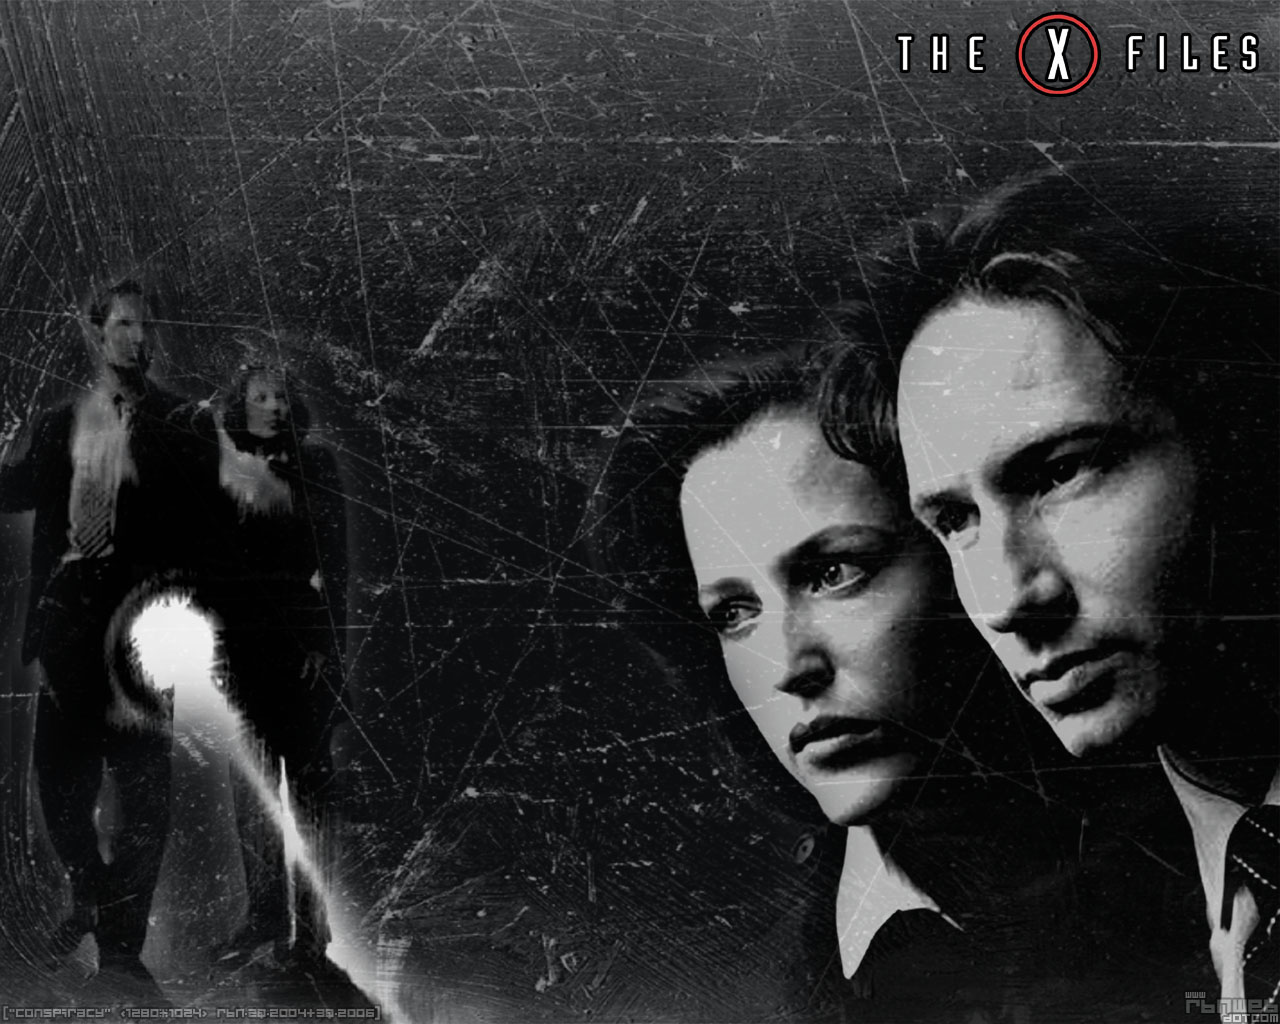 Download High quality X Files wallpaper / Movies / 1280x1024